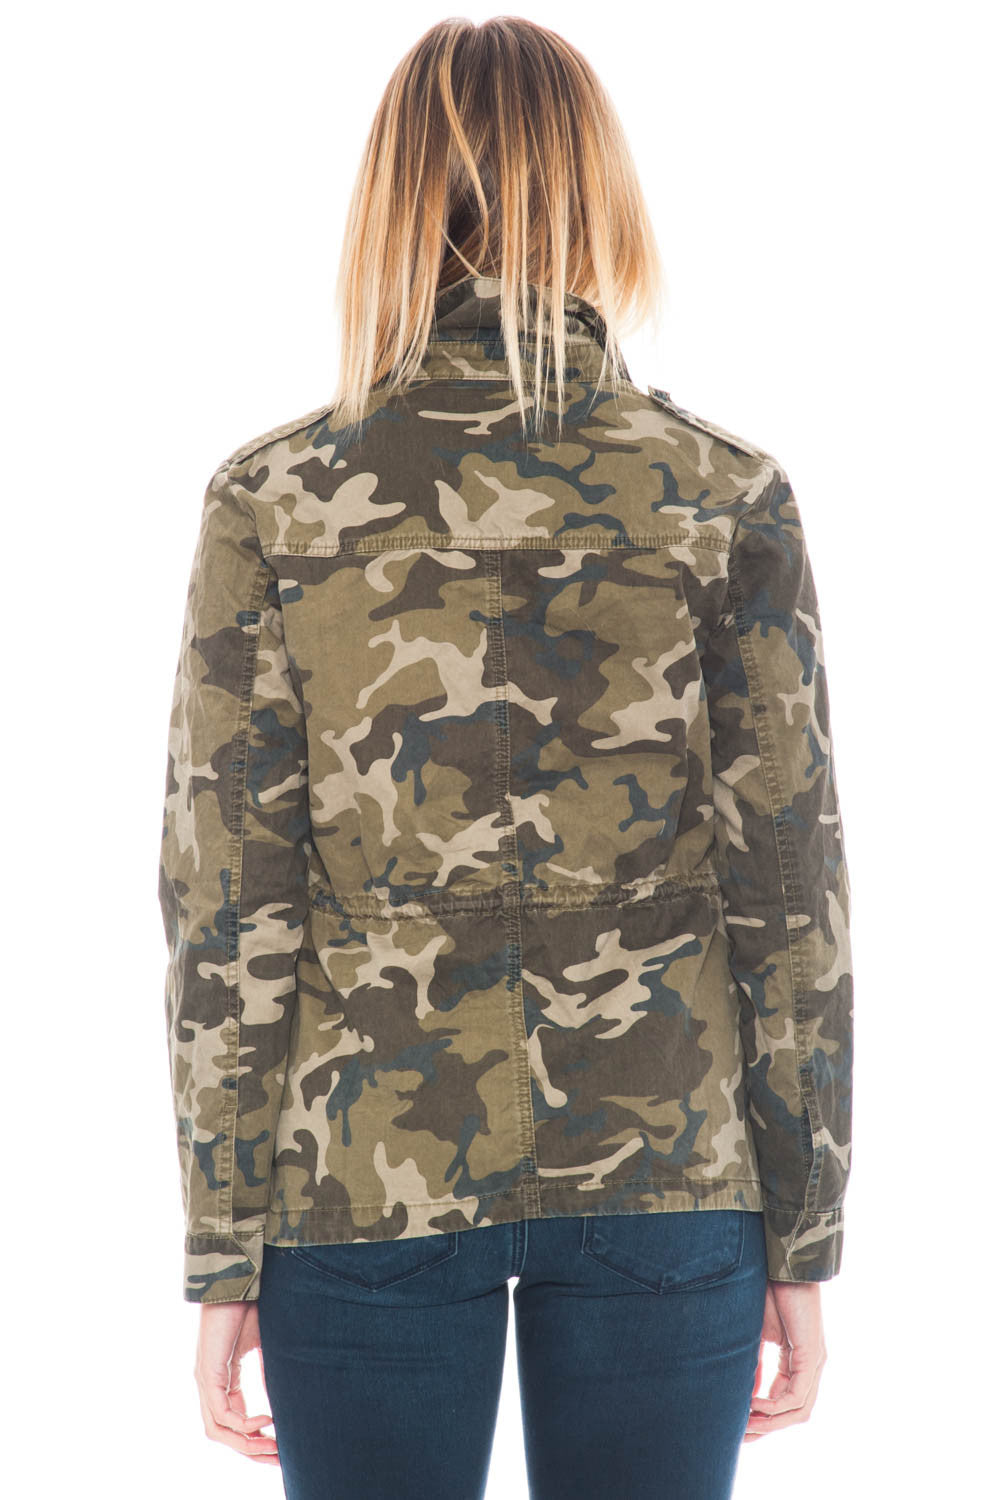 Jacket - Distressed Camo Utility with gold hardware